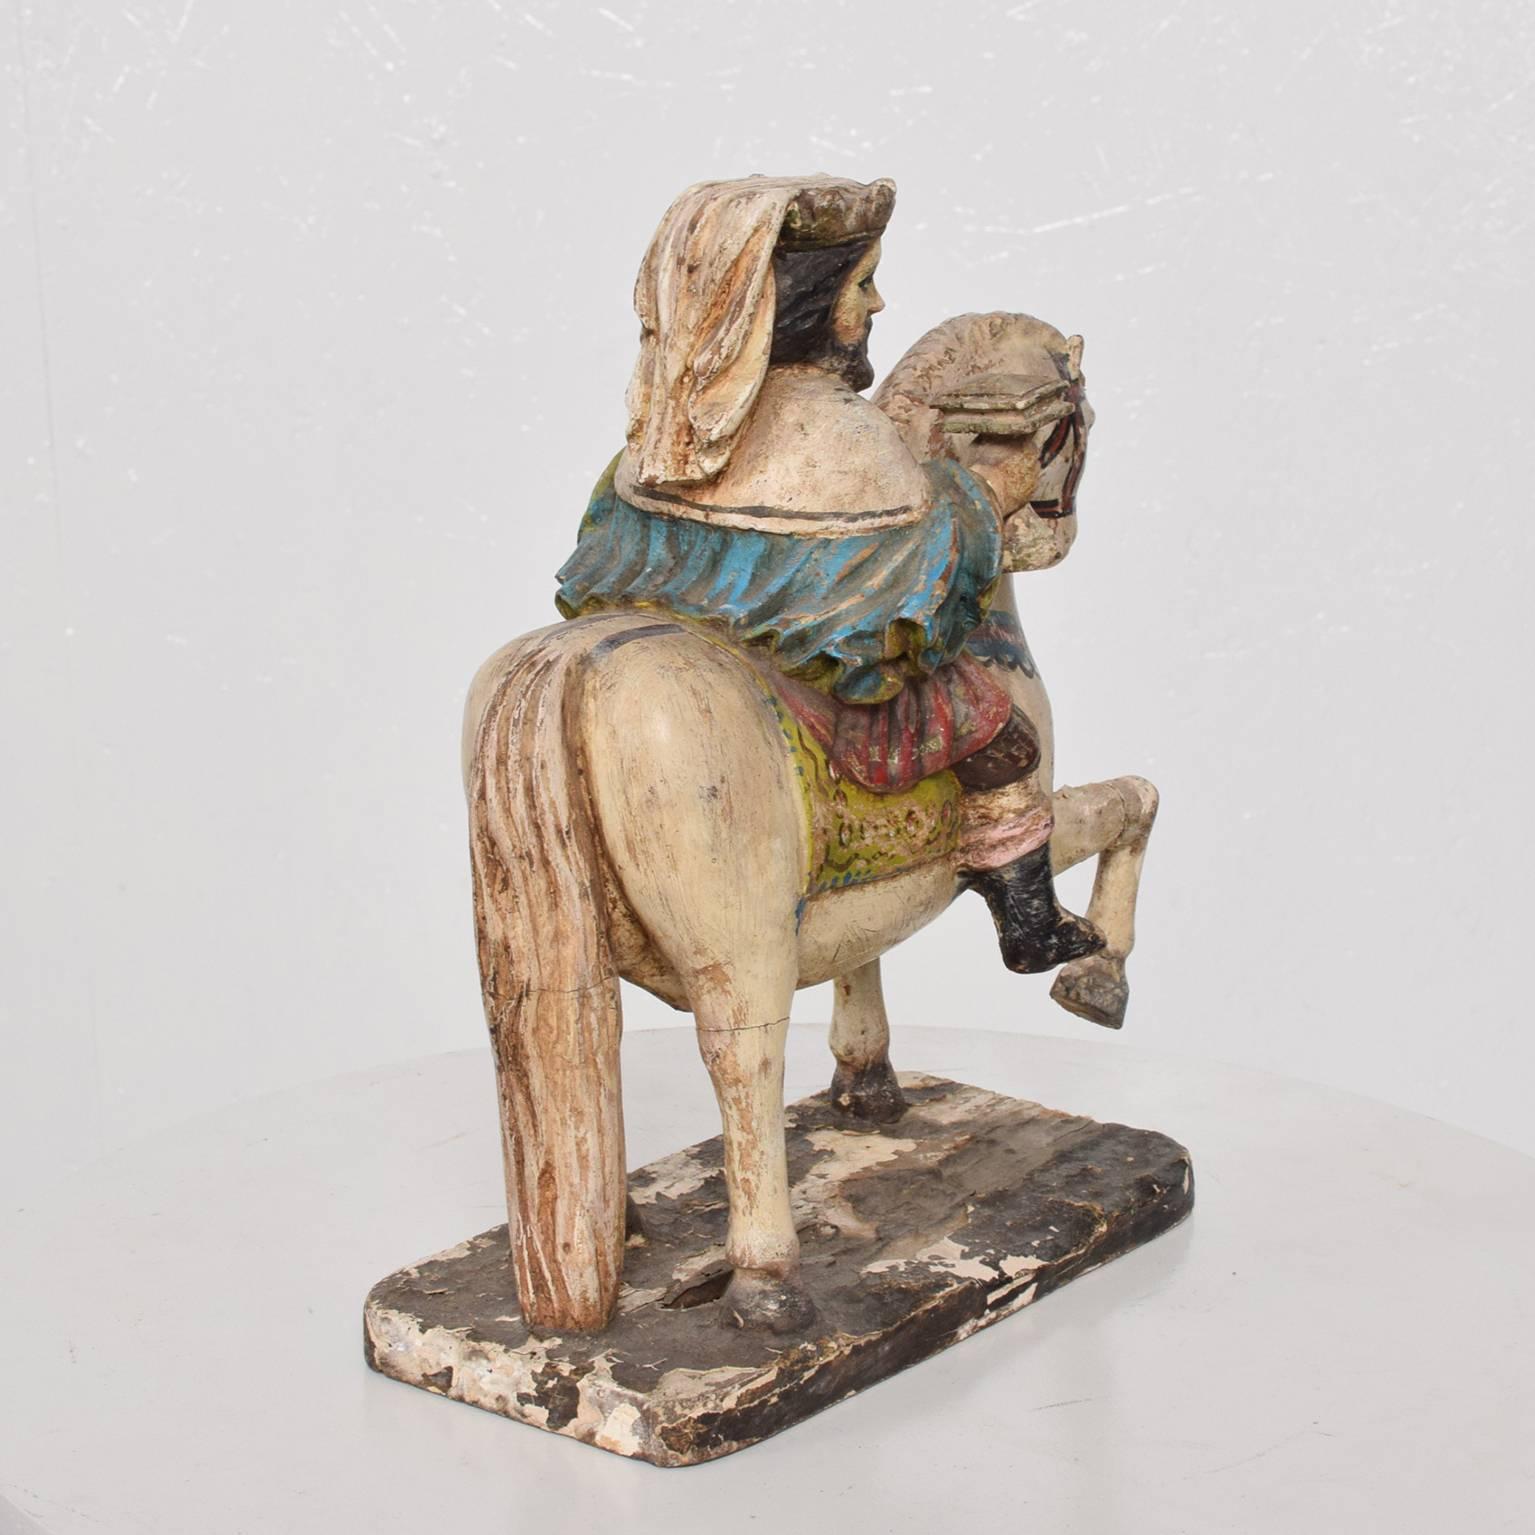 For your consideration, a beautiful antique decoration of horse and king carved in solid wood and decorated by hand. 

Dimensions: 11 3/4